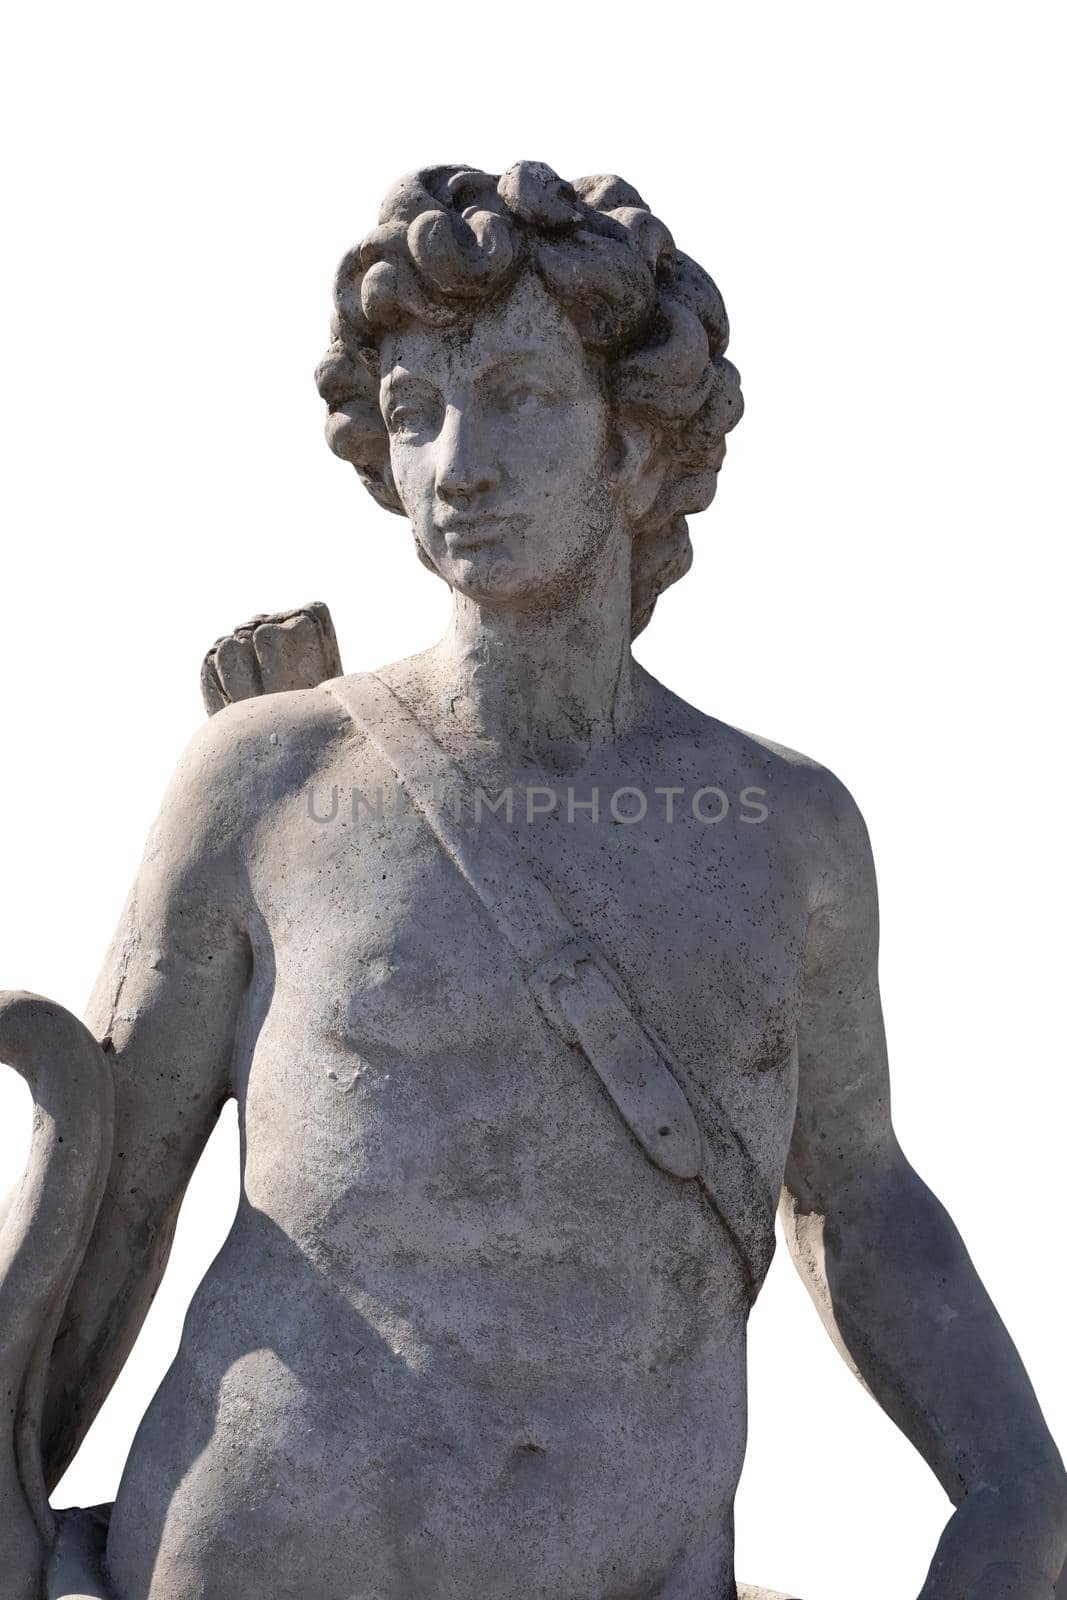 Stone sculpture of male hunter with archer's bag on white background. art and classical style romantic figurative stone sculpture.